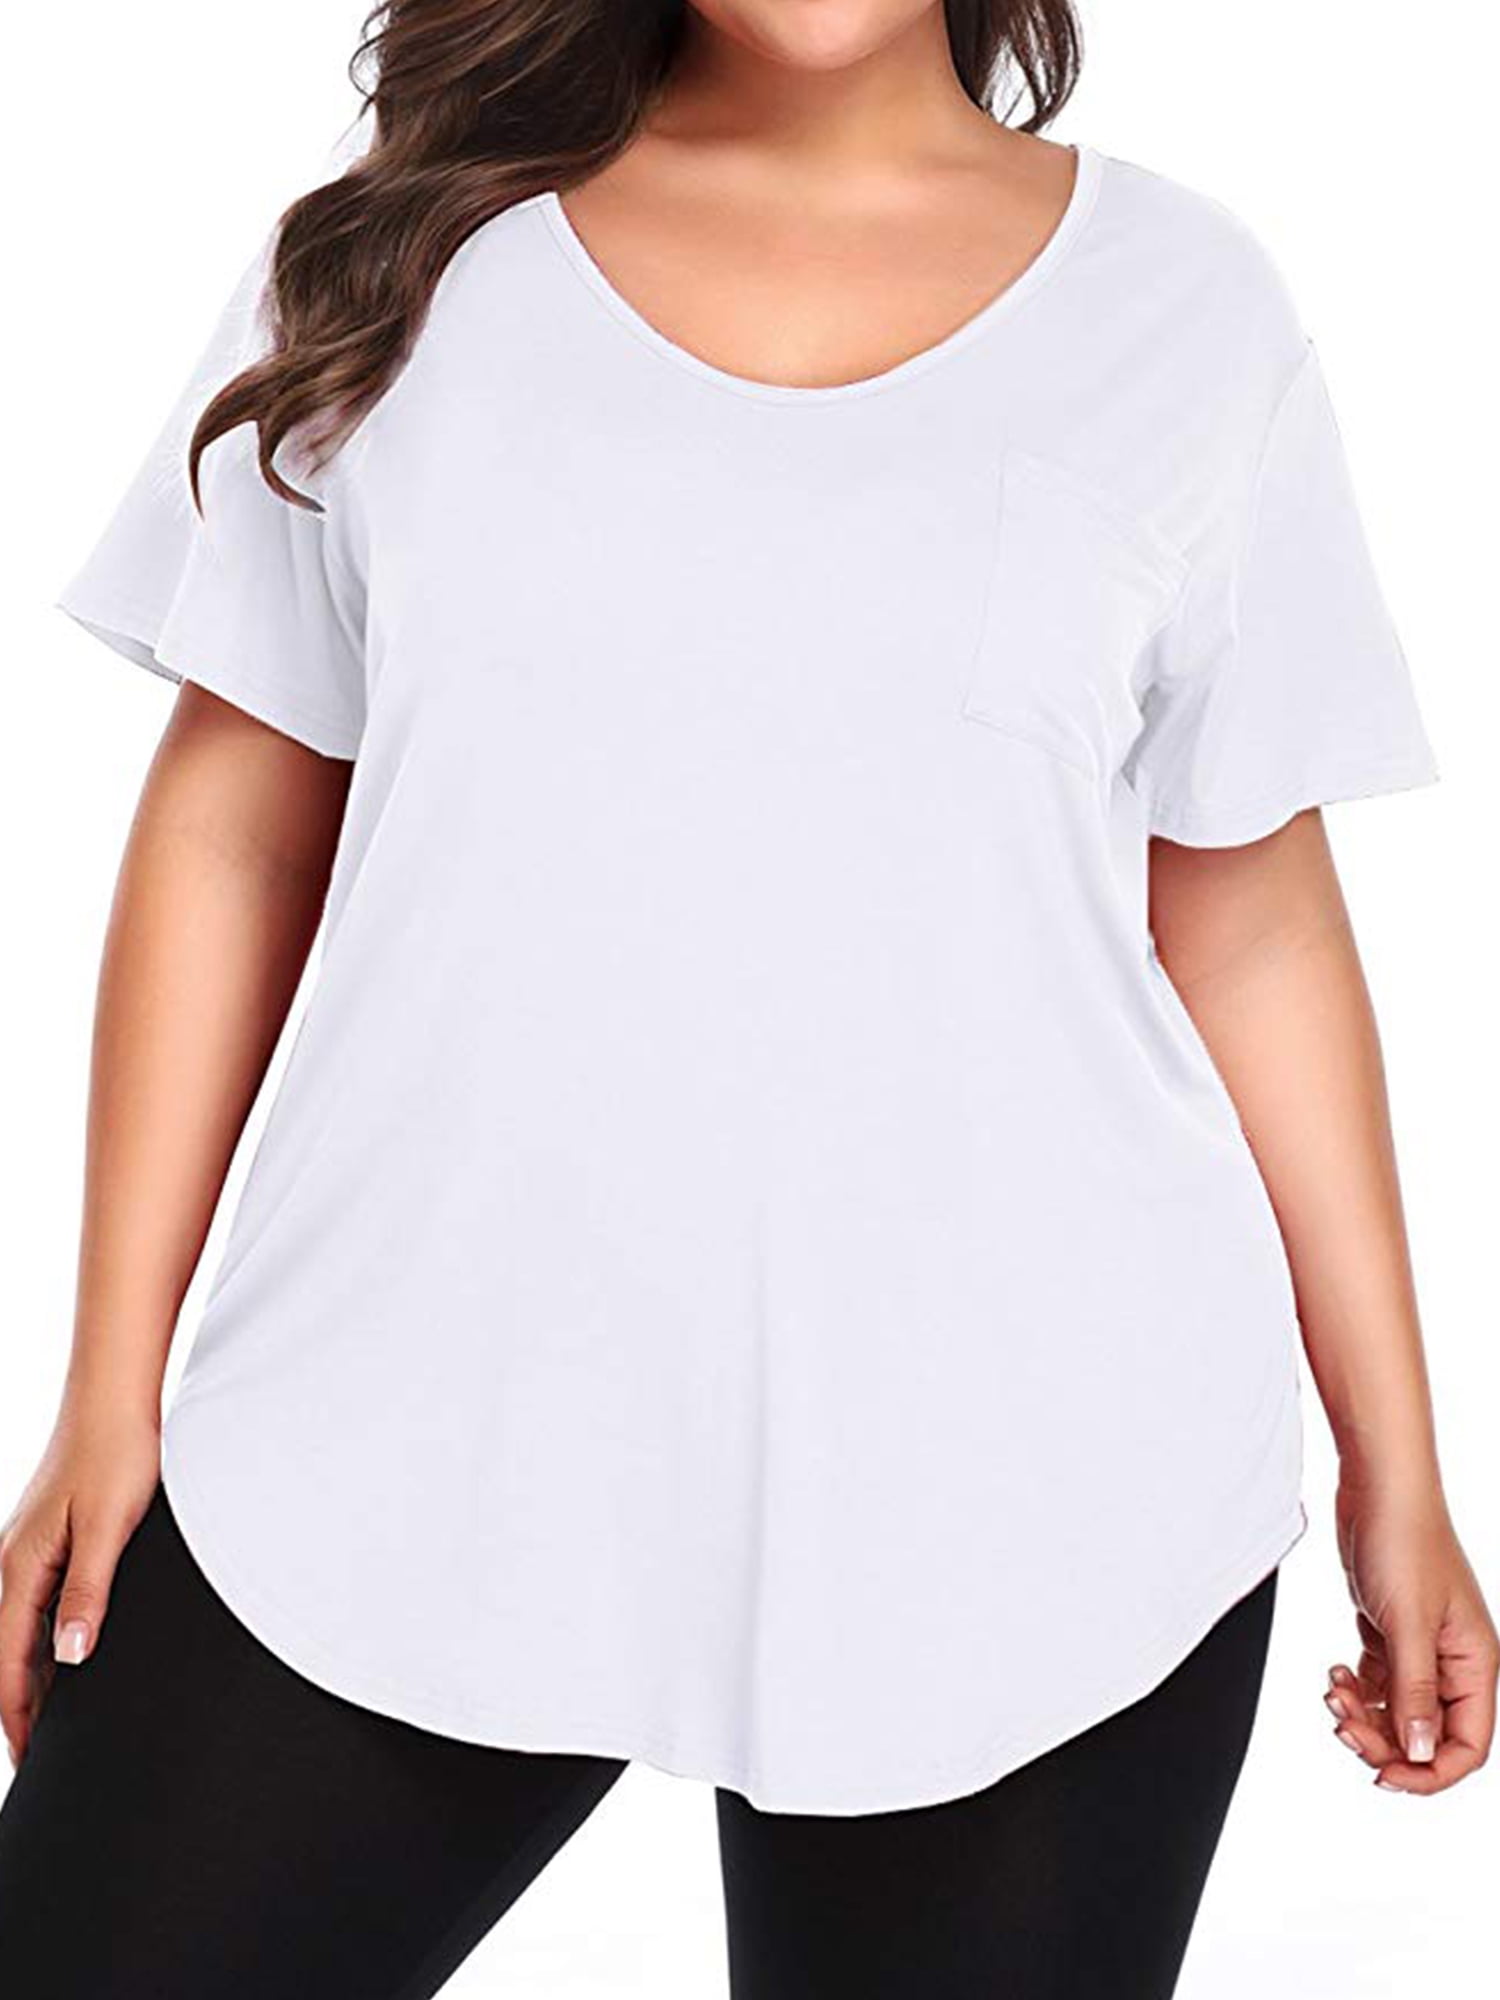 Sexy Dance Plus Size Tops for Women Short Sleeve Summer Blouse